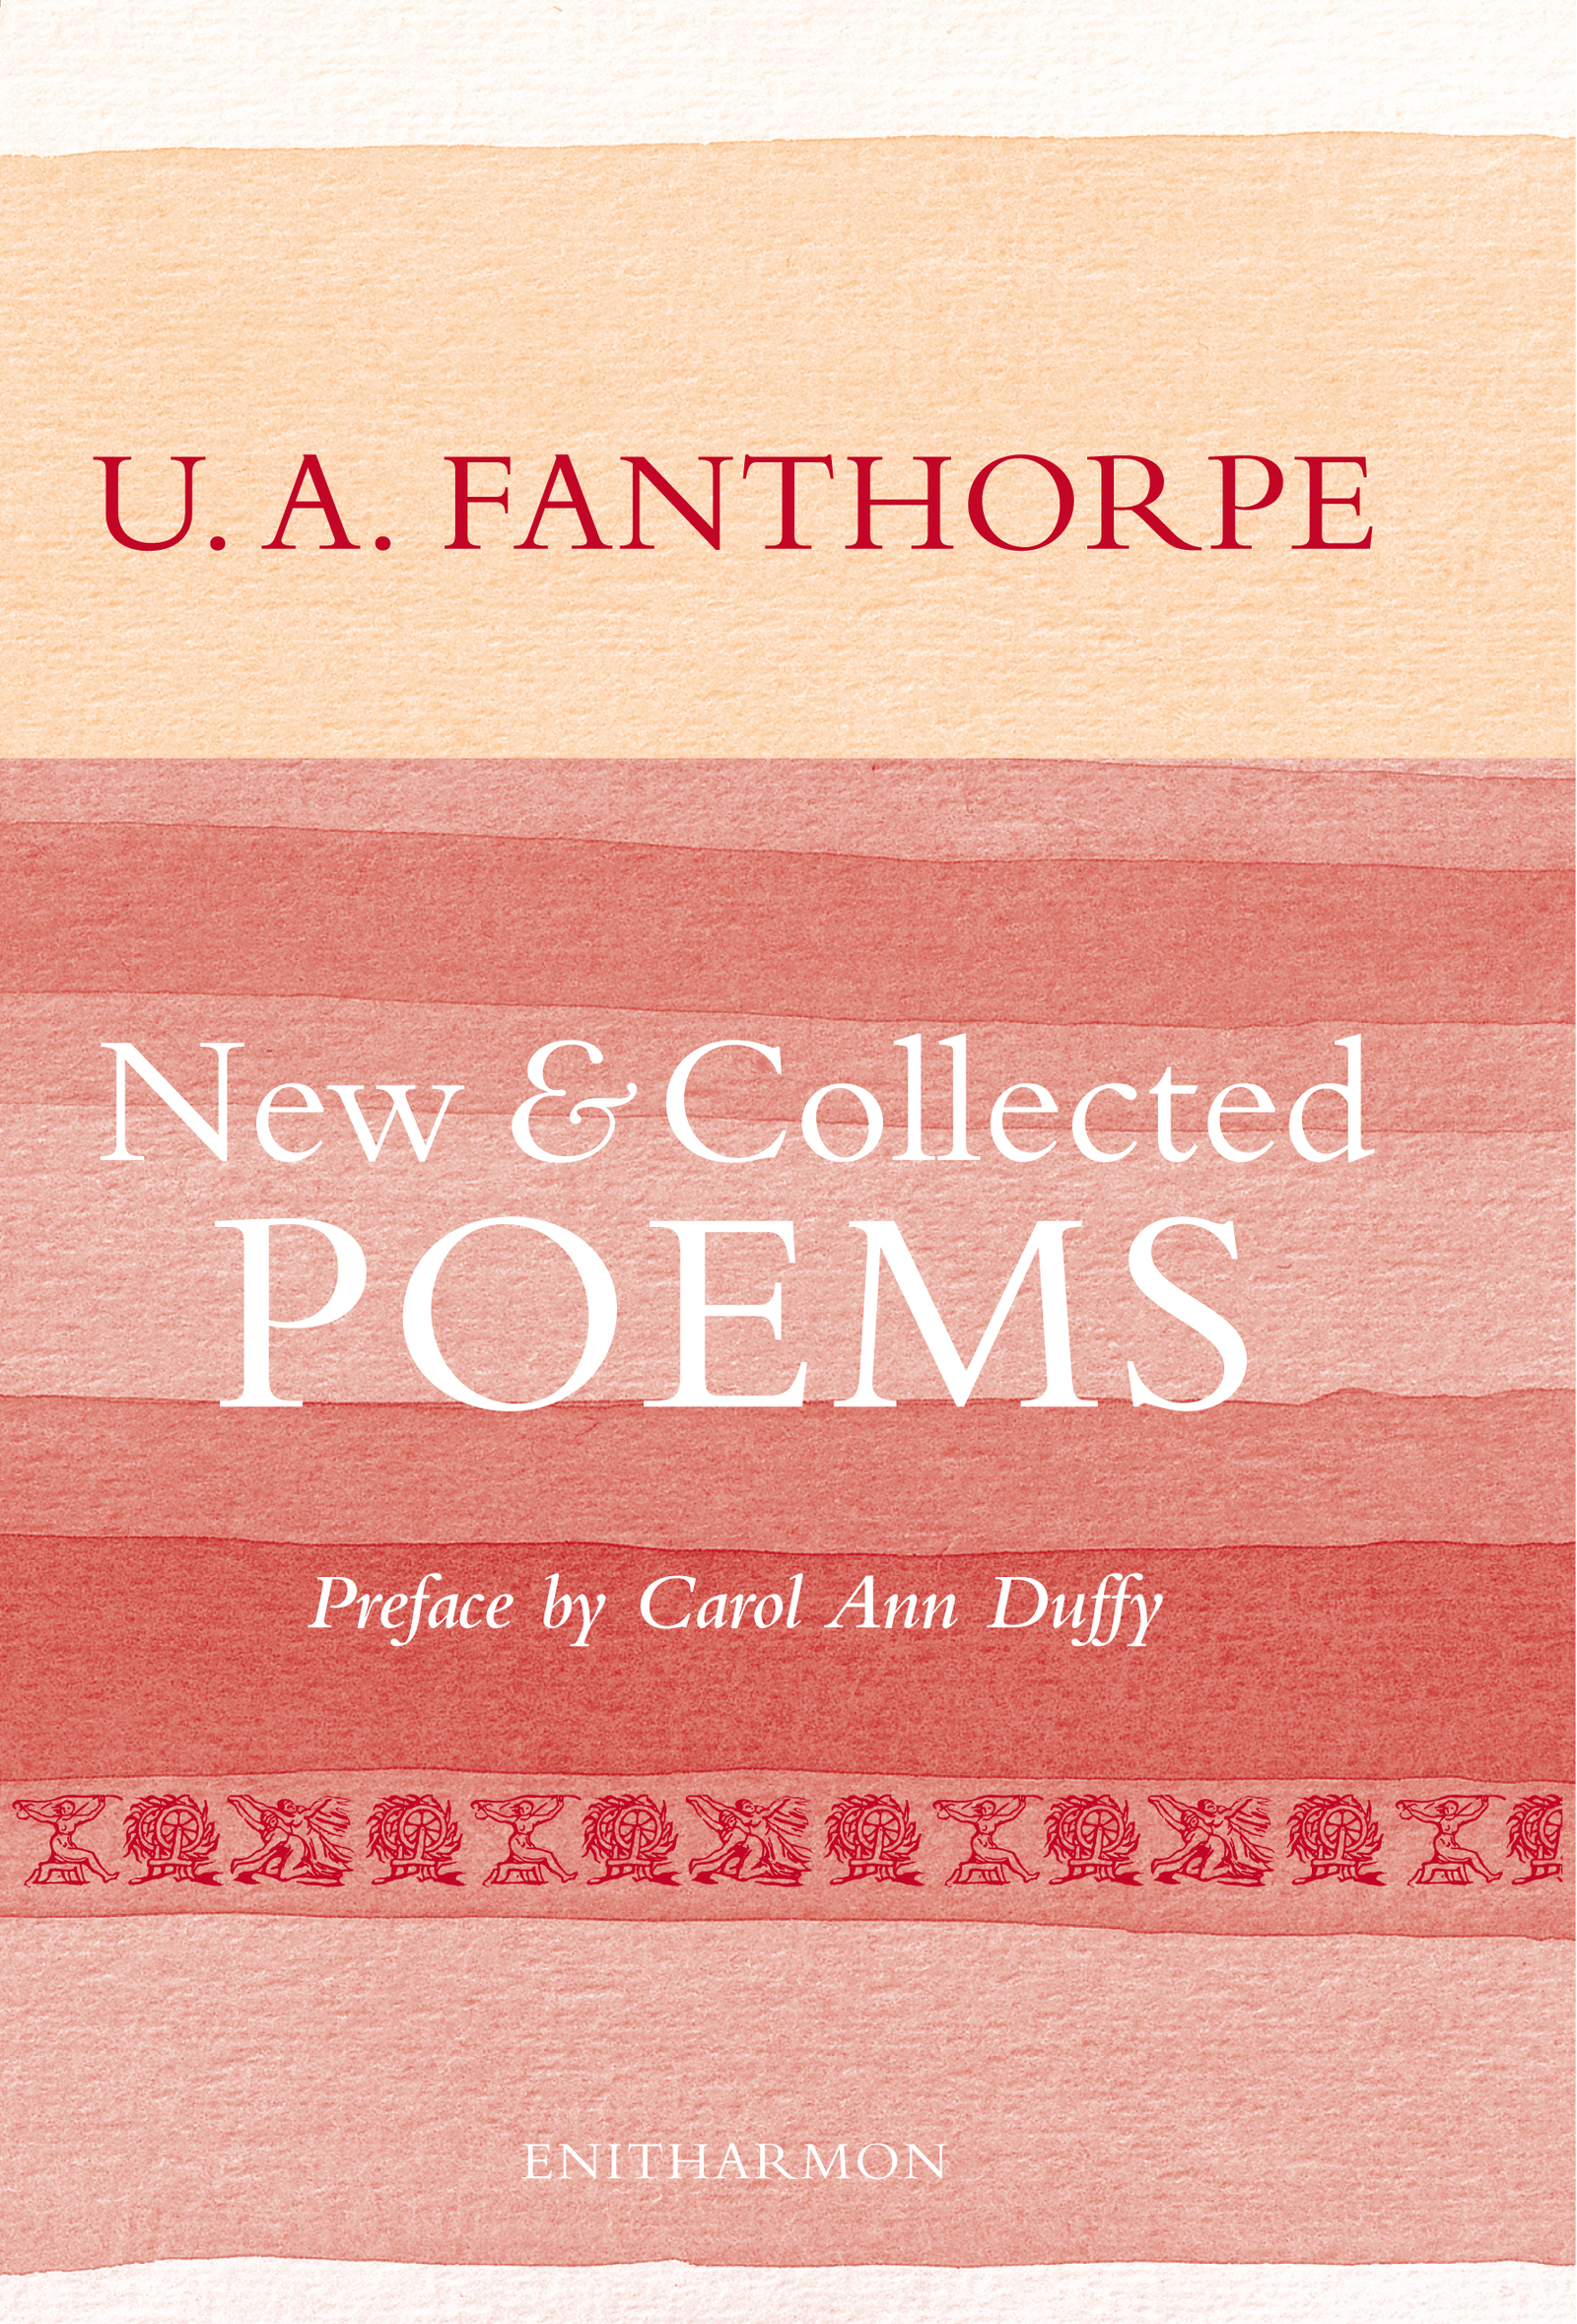 New and Collected Poems - 15-24.99